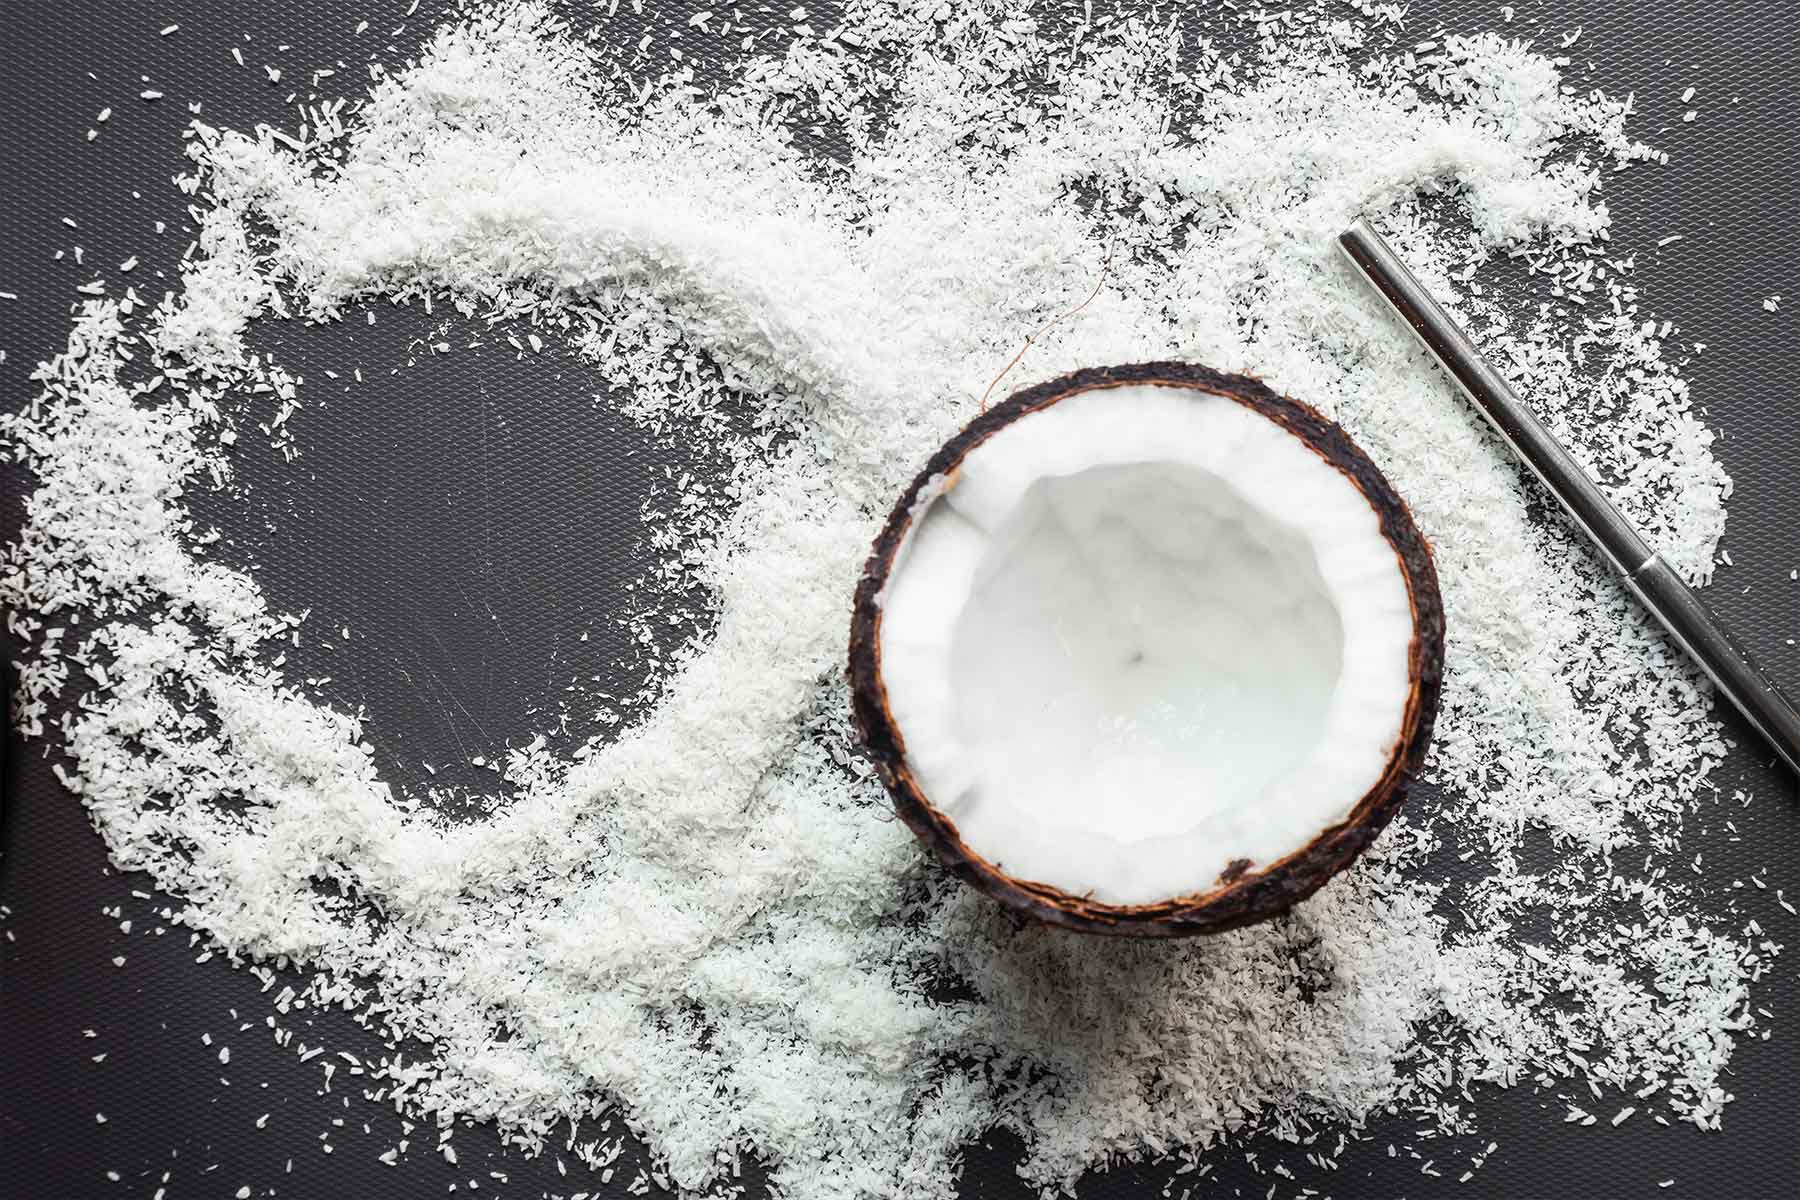 For further use, the coconut flesh is removed or cut from the dried coconut. This is known as copra and is then processed into coconut chips and coconut flakes. Coconut flour is made by finely grinding the copra and removing some of the oil. (Image: © Louis Hansel/unsplash.com)